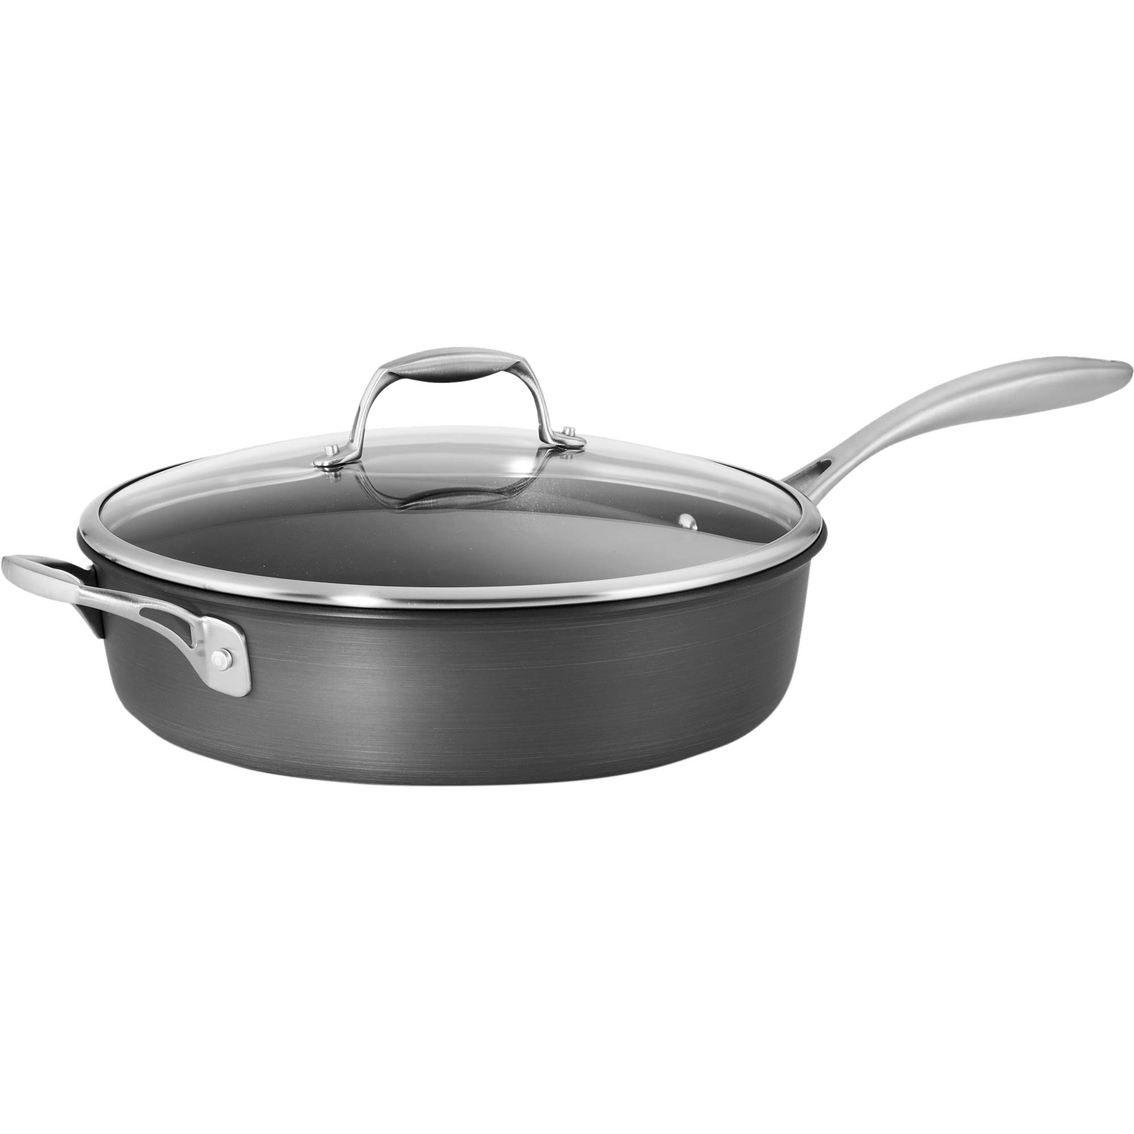 Tramontina Gourmet Hard Anodized 5.5 Qt. Covered Deep Saute Pan, Fry Pans  & Skillets, Household